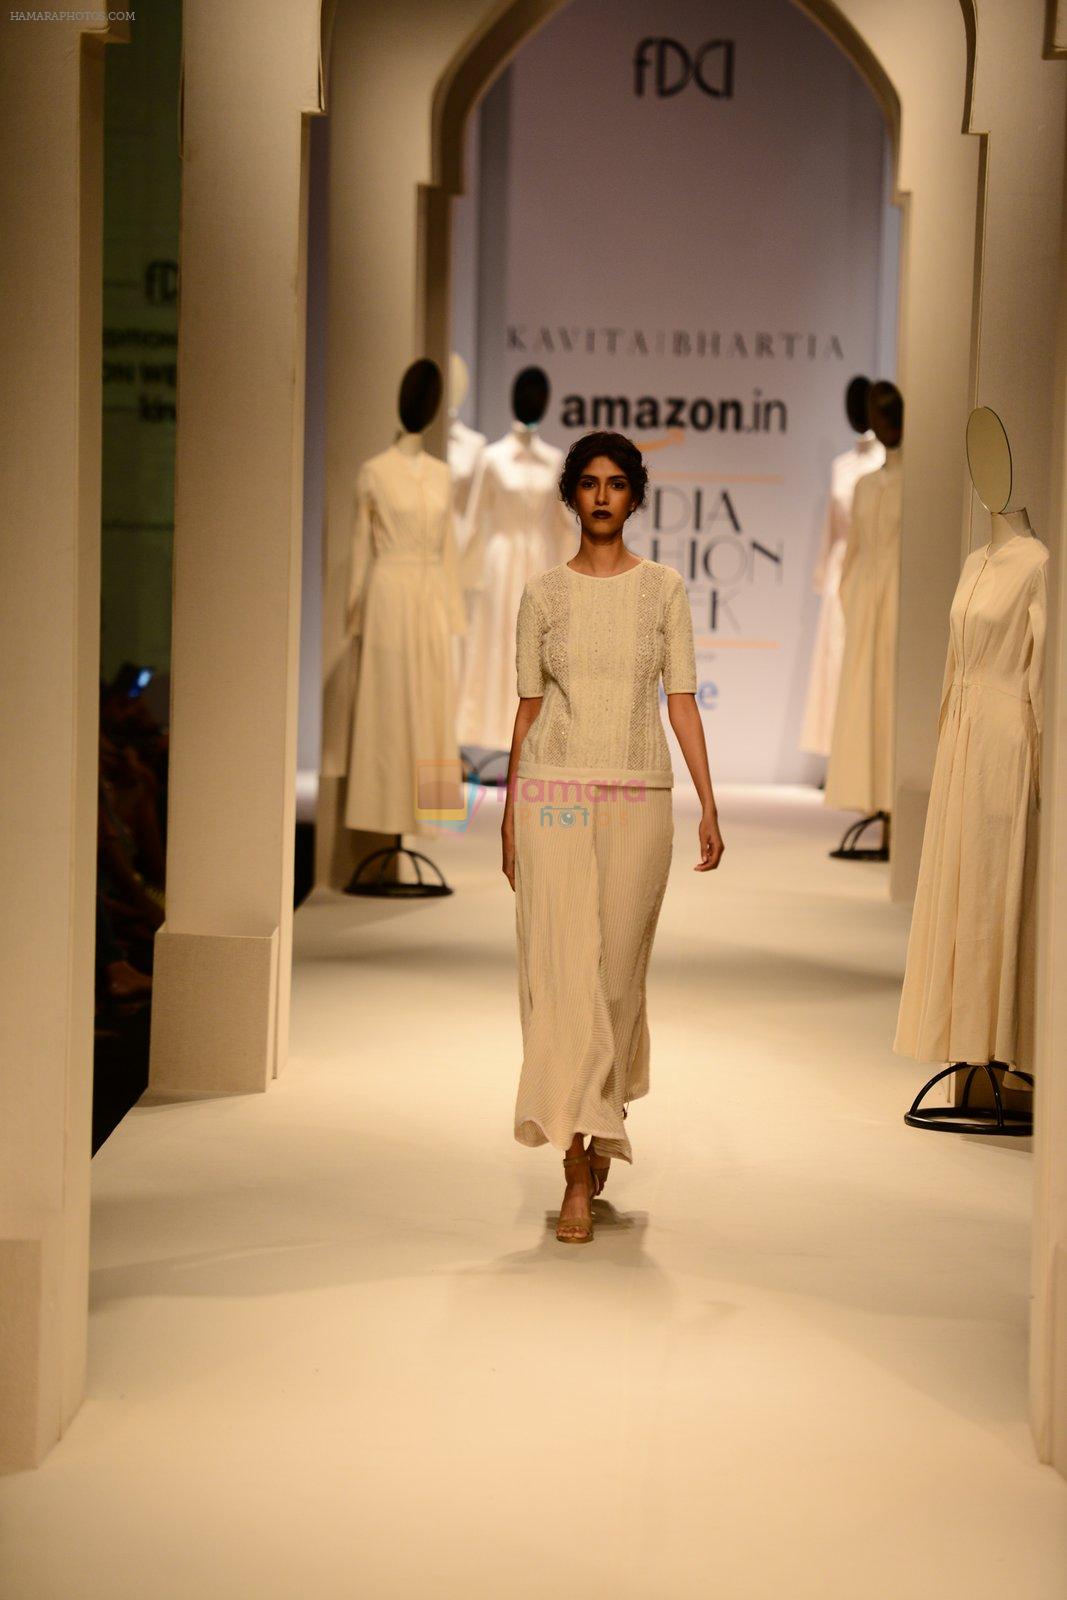 Model walk the ramp for Kavita Bhartia on day 1 of Amazon India Fashion Week on 25th March 2015